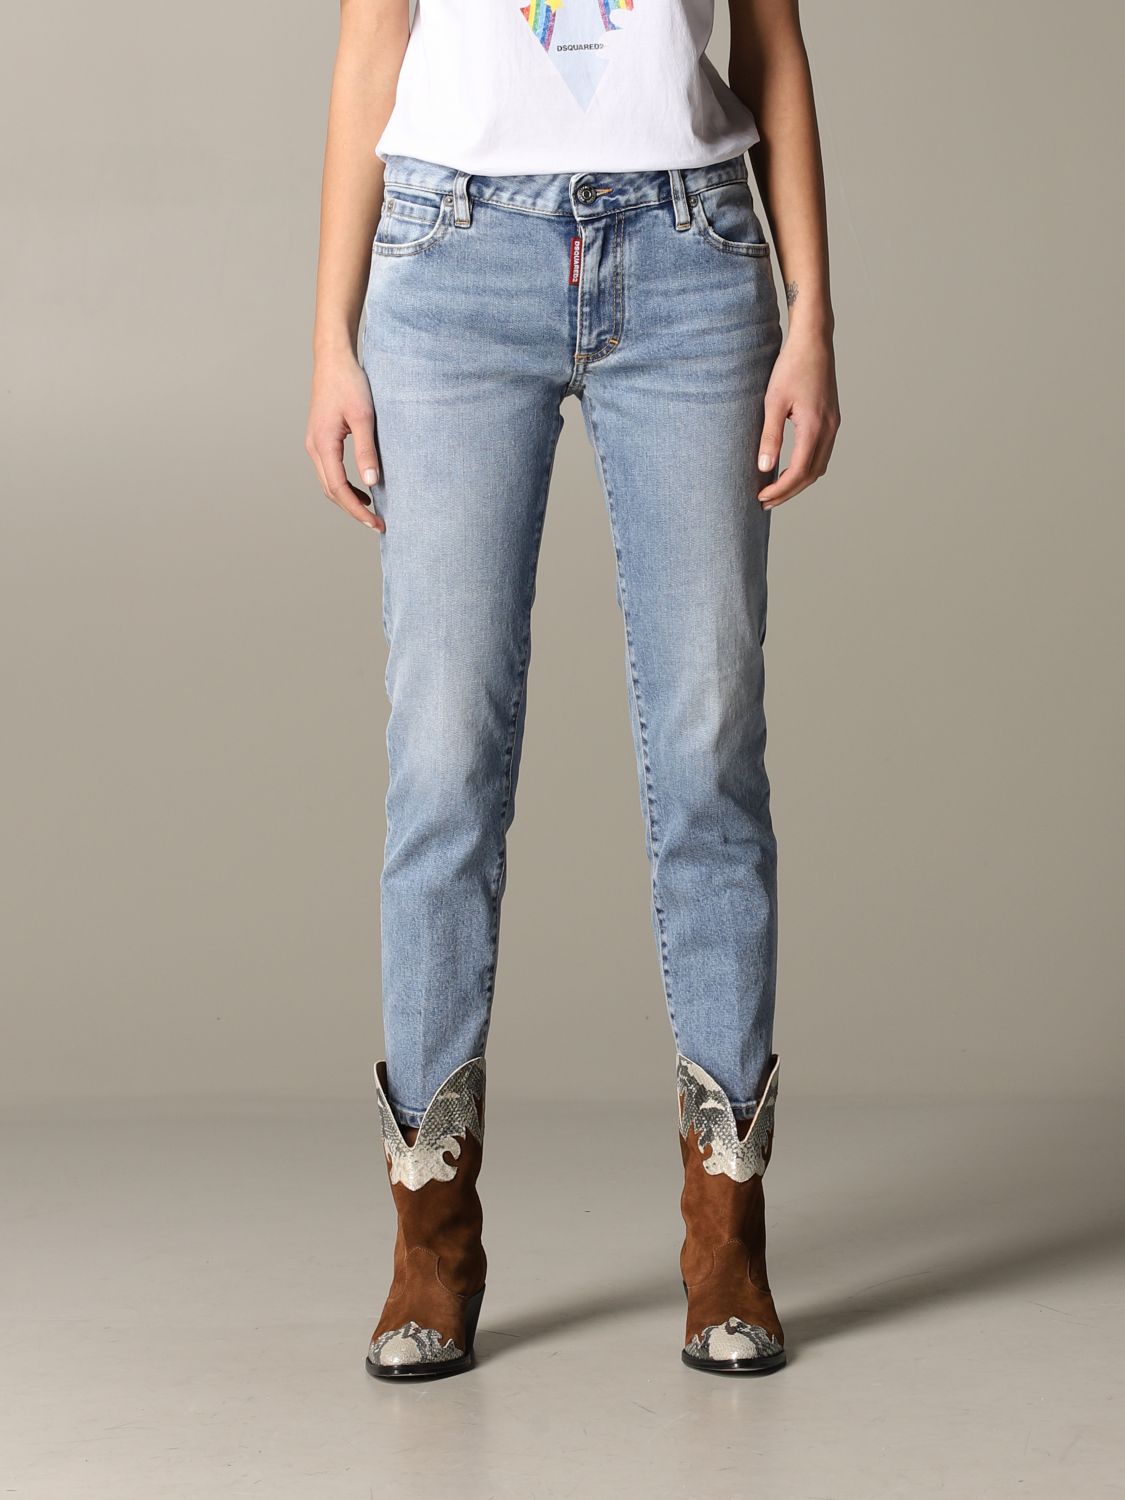 jeans dsquared2 taille basse